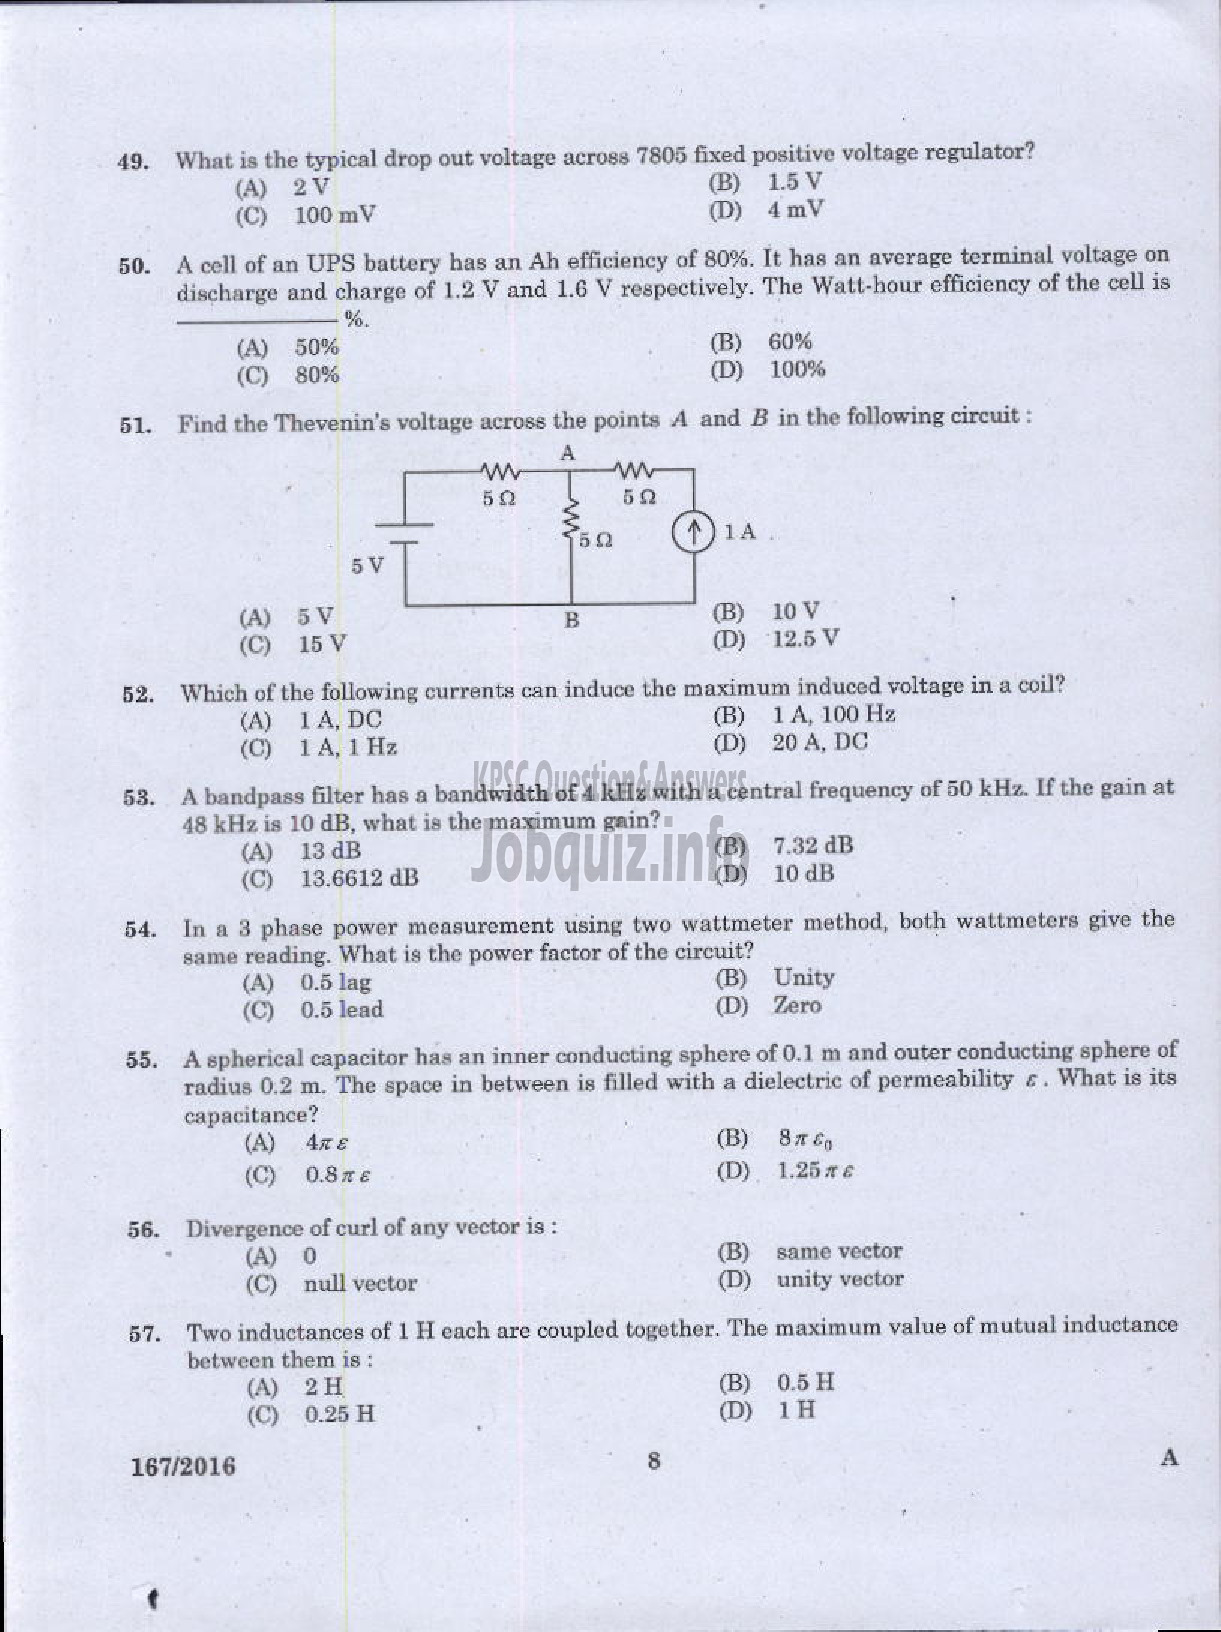 Kerala PSC Question Paper - LECTURER IN ELECTRICAL AND ELECTRONICS ENGINEERING GOVST POLYTECHNICS TECHNICAL EDUCATION-6